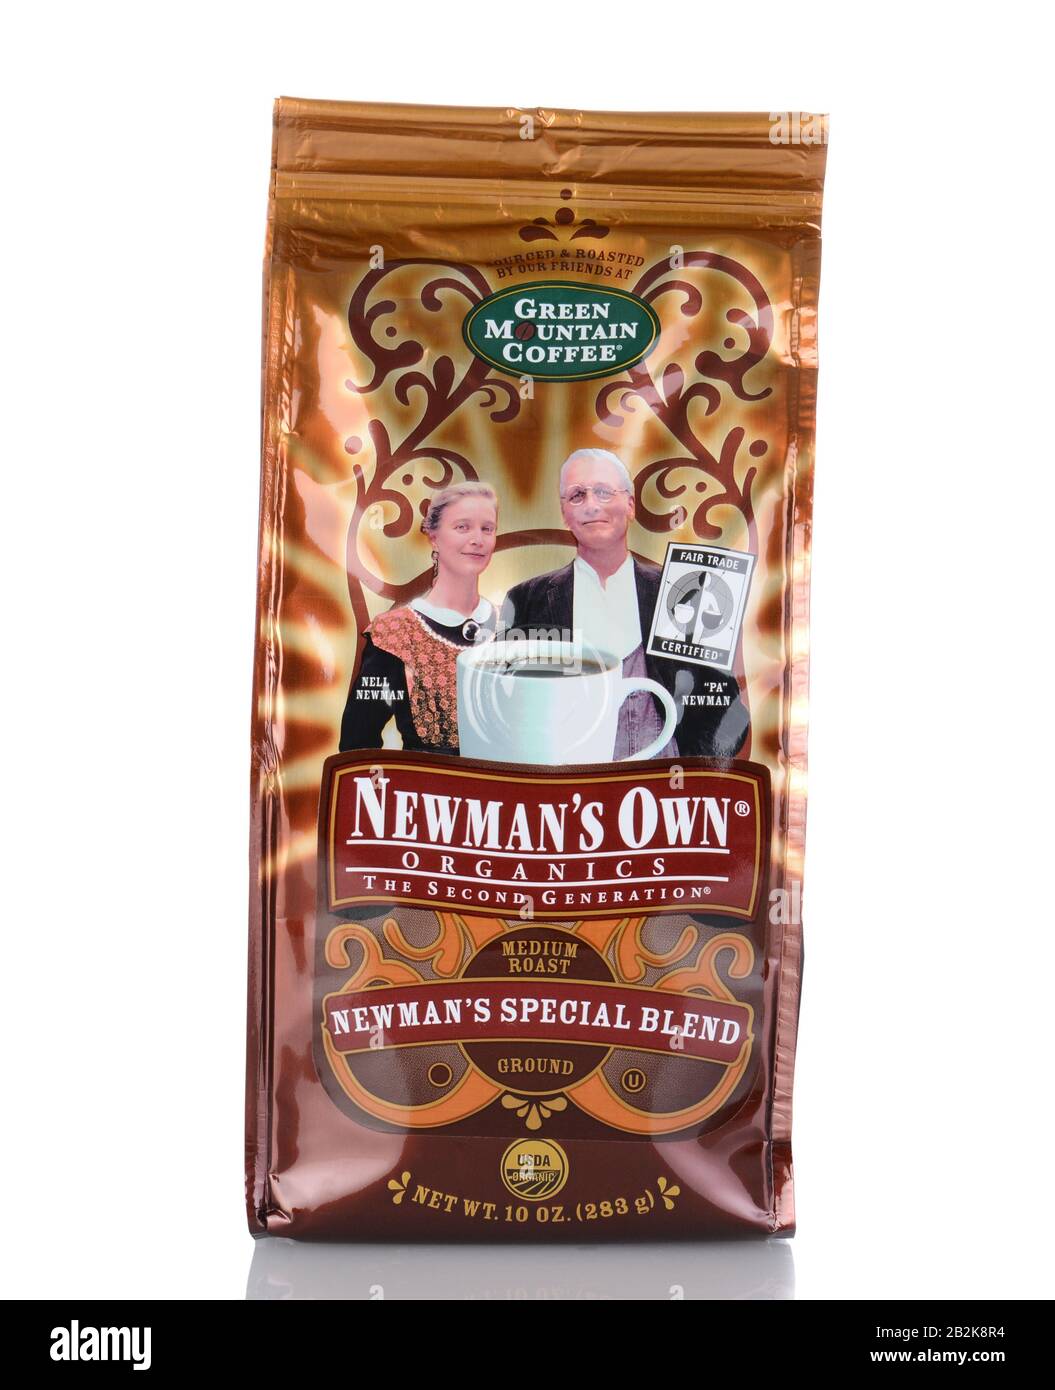 IRVINE, CA - January 05, 2014: A 10 oz bag of Newman's Own Green Mountain Coffee. The company gives 100% of the after-tax profits from the sale of its Stock Photo